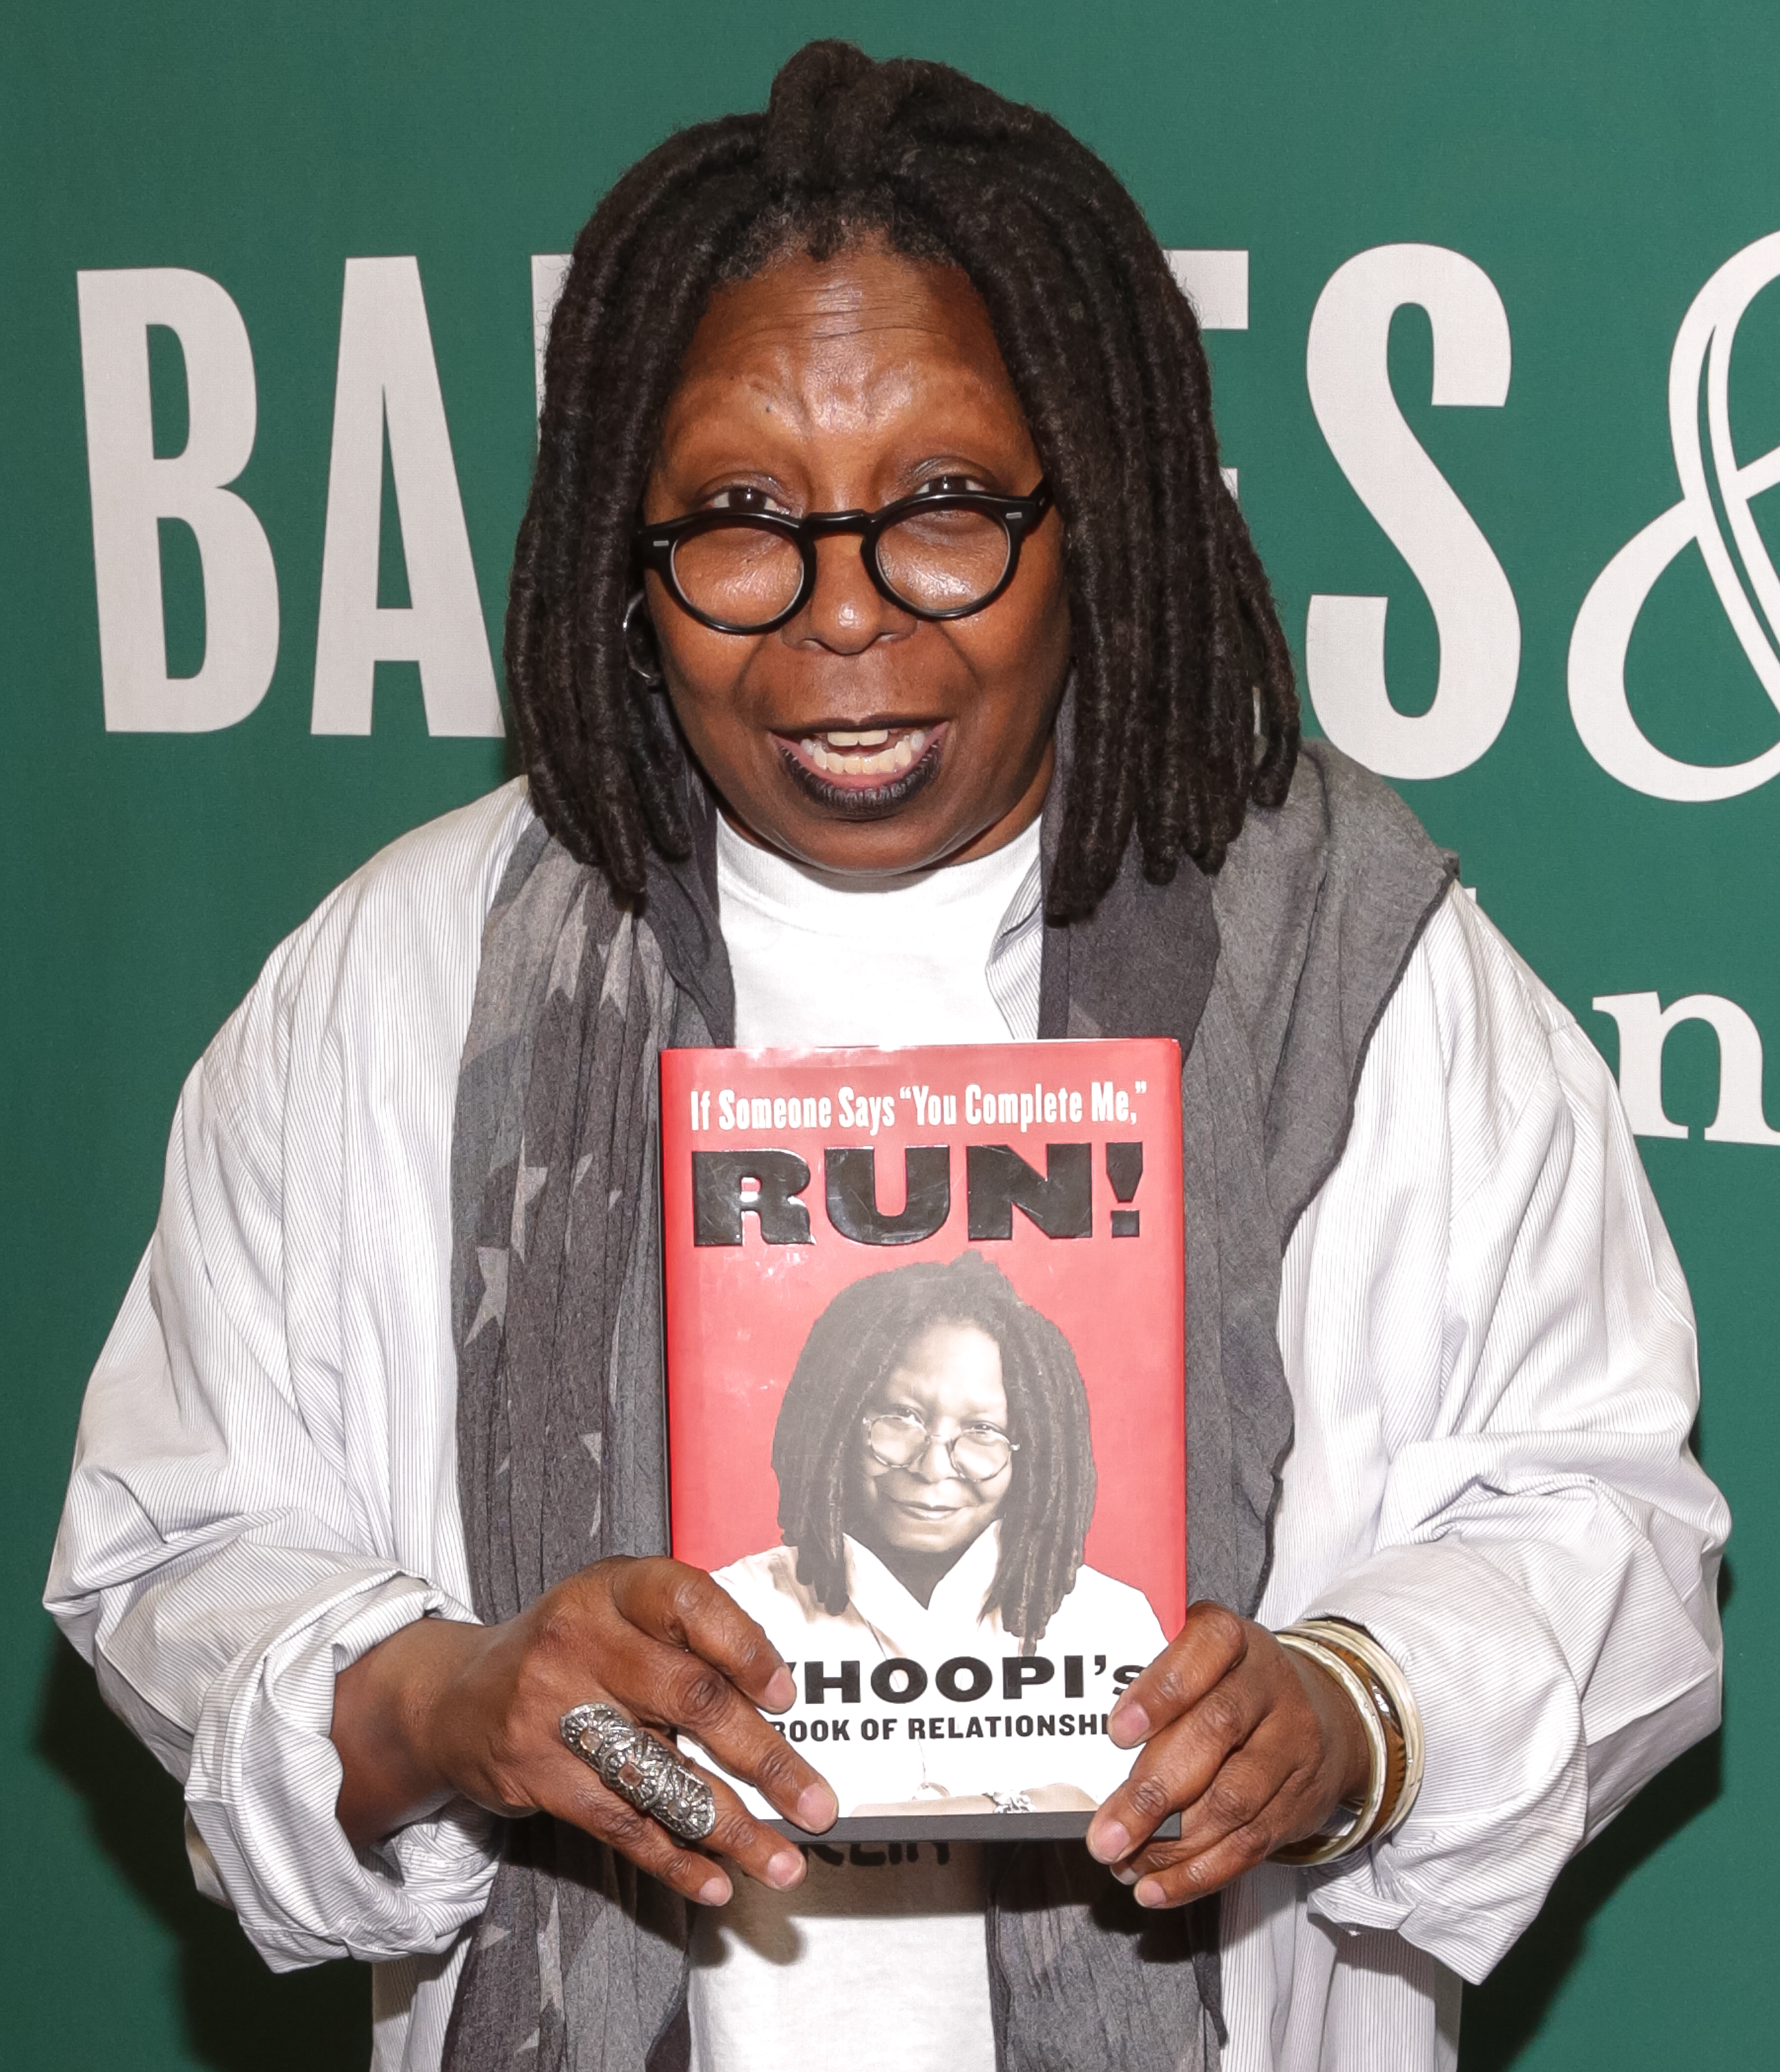 Whoopi Goldberg at the "If Someone Says You Complete Me, RUN!: Whoopi's Big Book of Relationships" signing in New York City, 2015 | Source: Getty Images